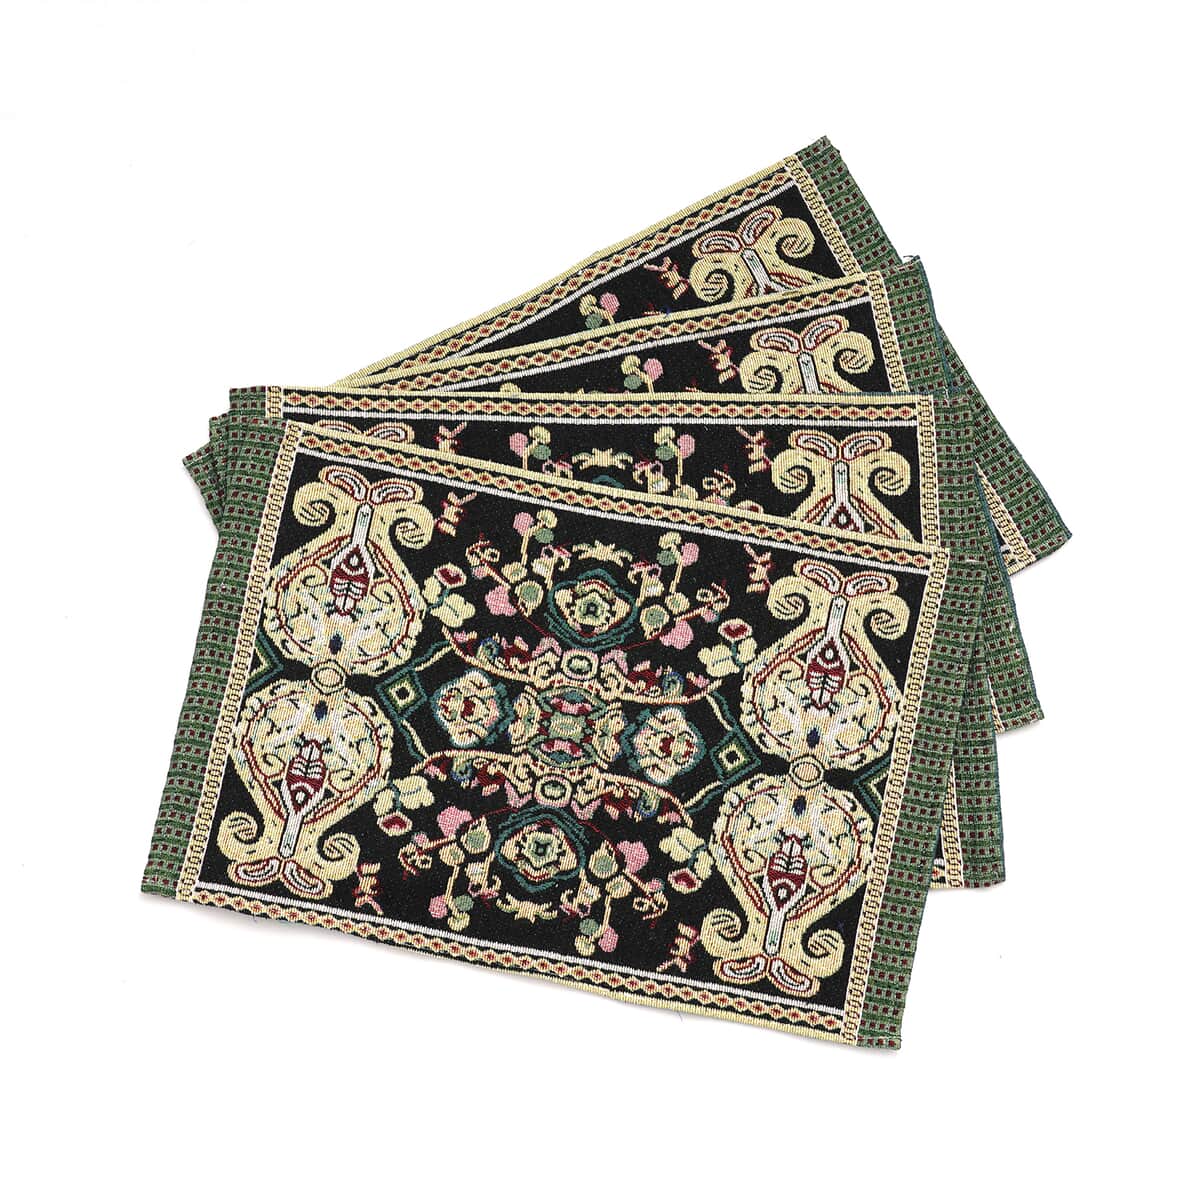 Set of 5 Black with Multi Color Vintage Art Printed Jacquard Placemats and Table Runner image number 4